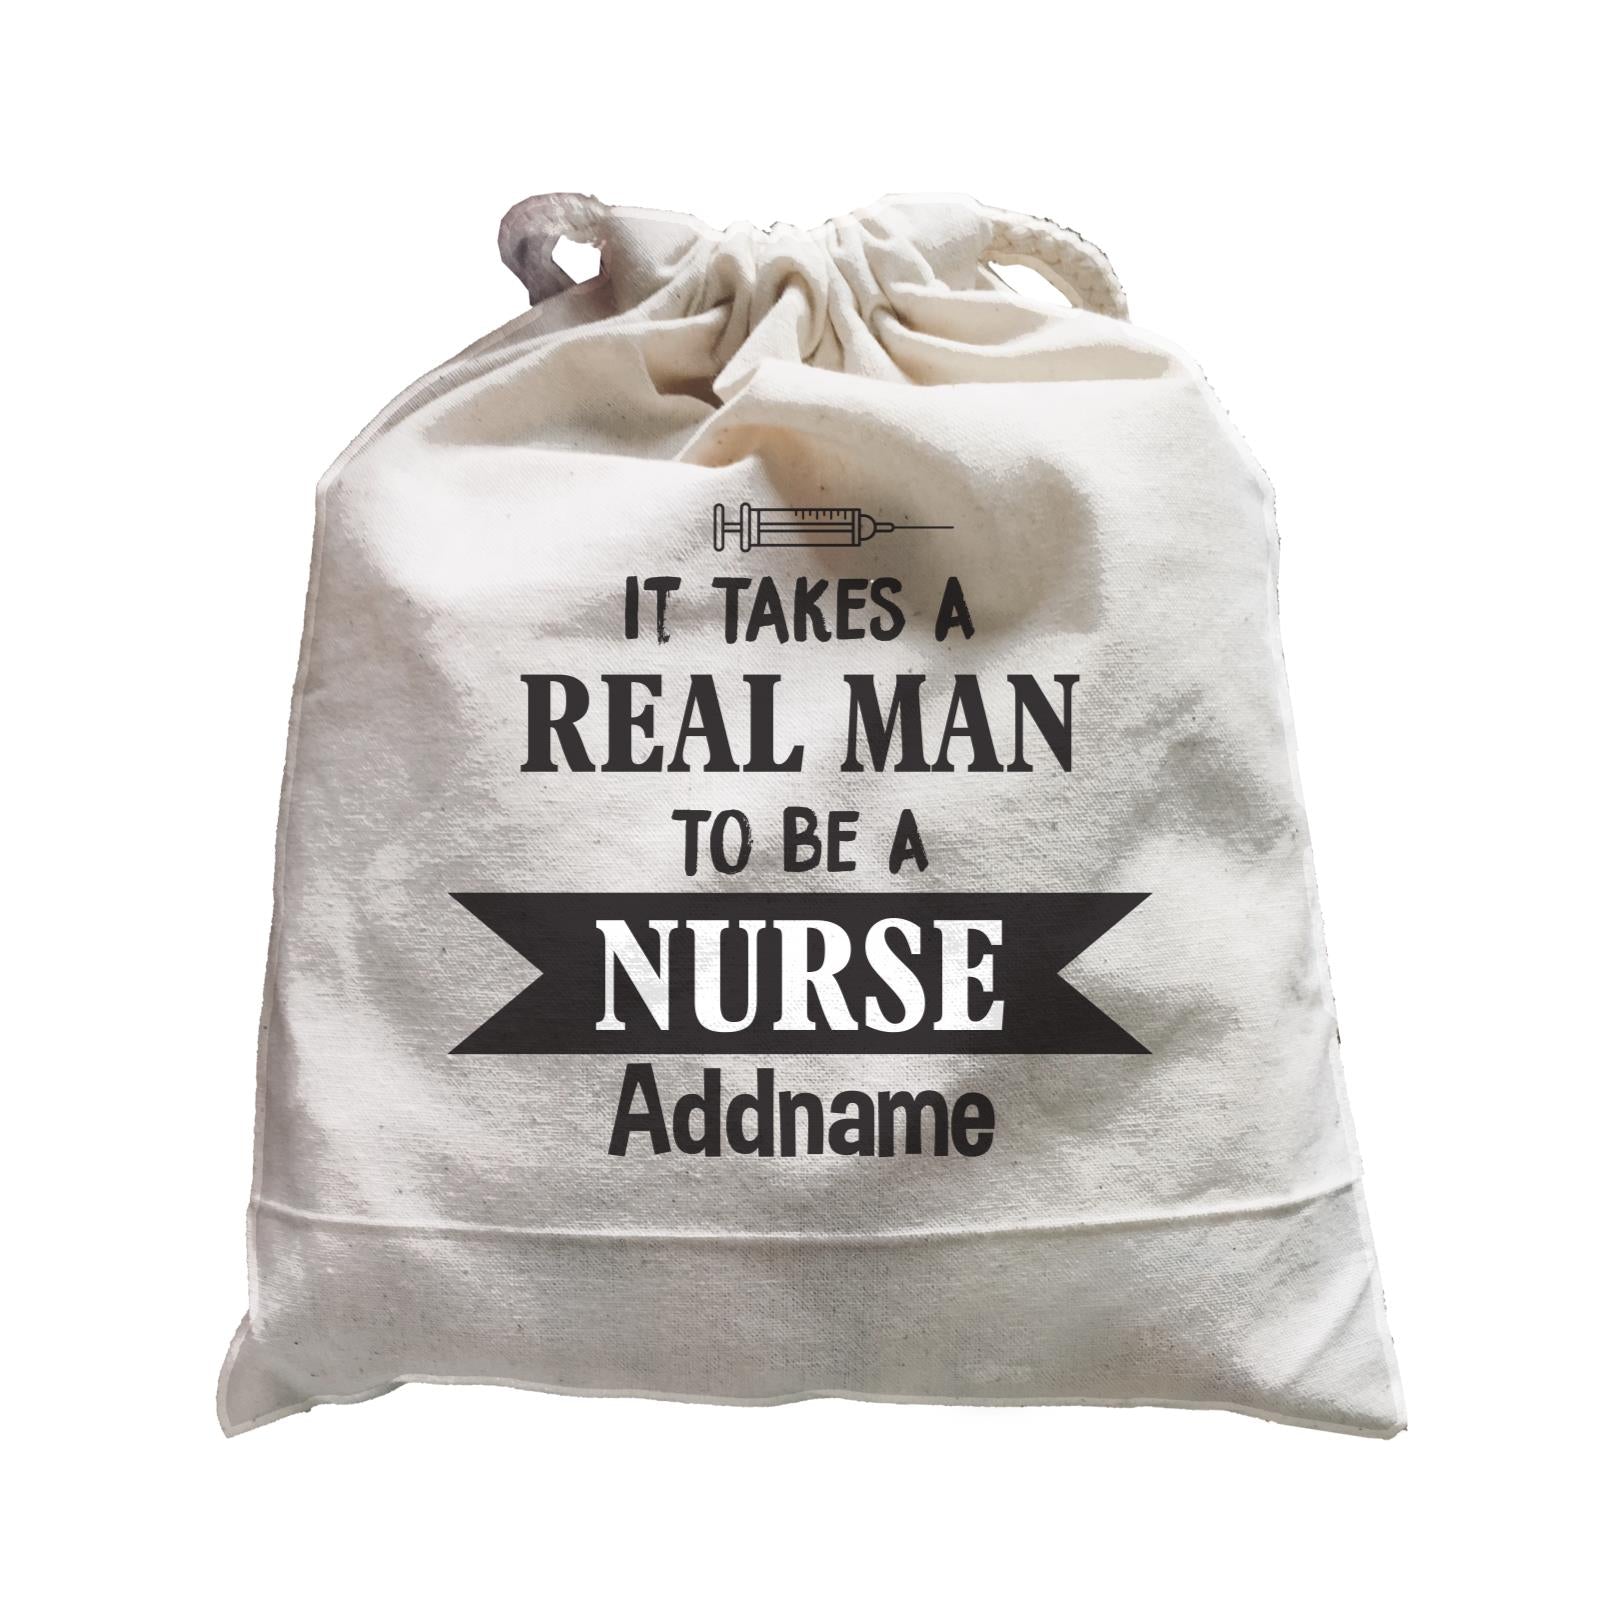 It Takes a Real Man to be a Nurse Satchel